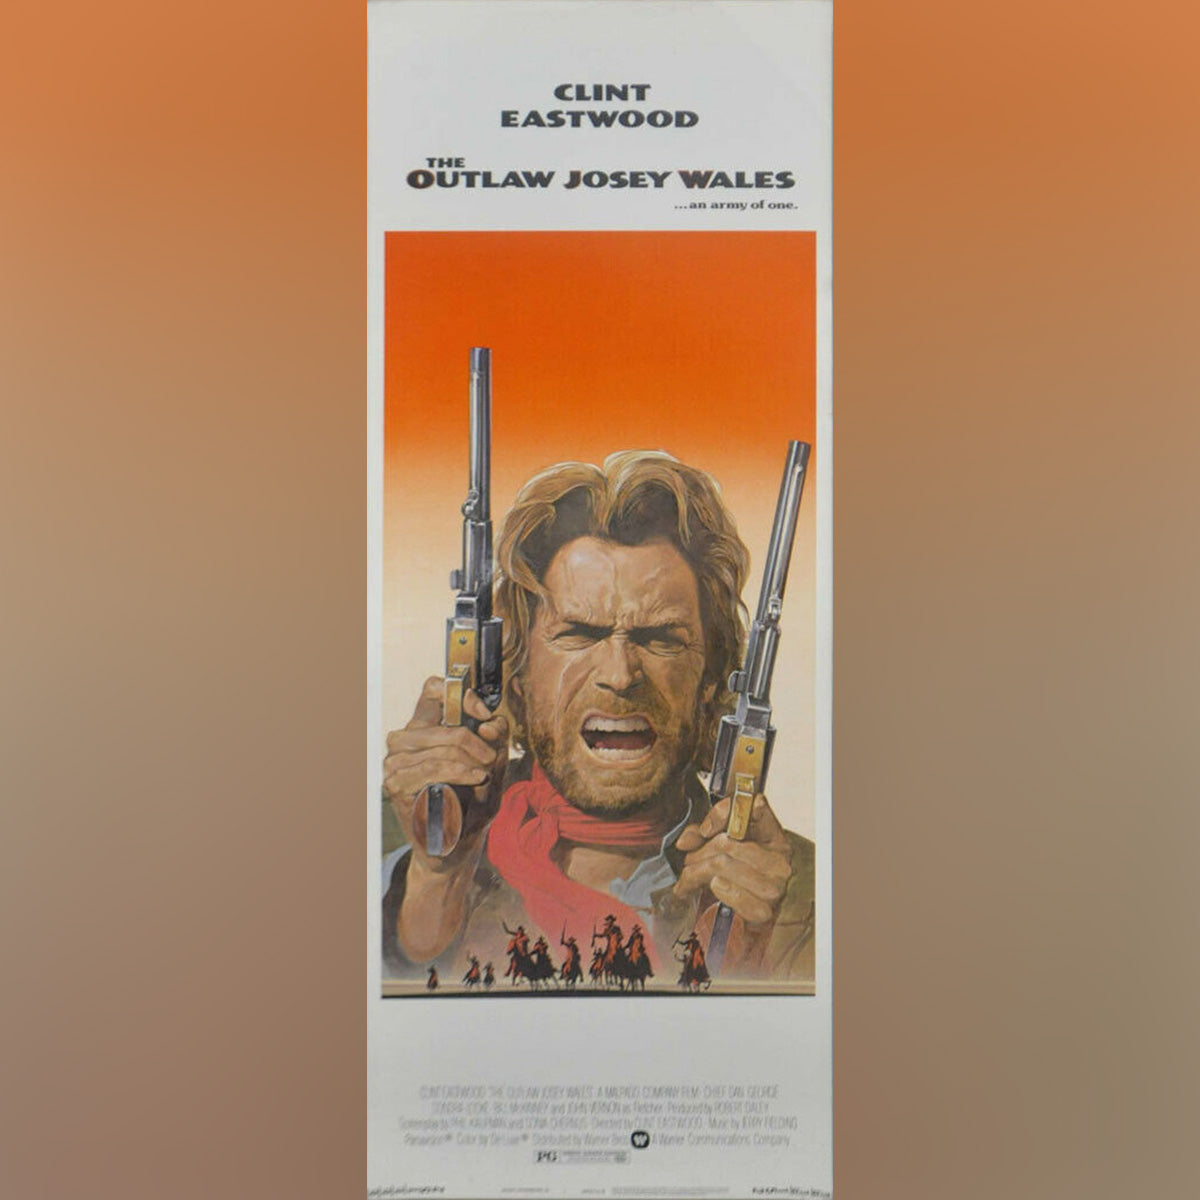 Original Movie Poster of Outlaw Josey Wales, The (1976)